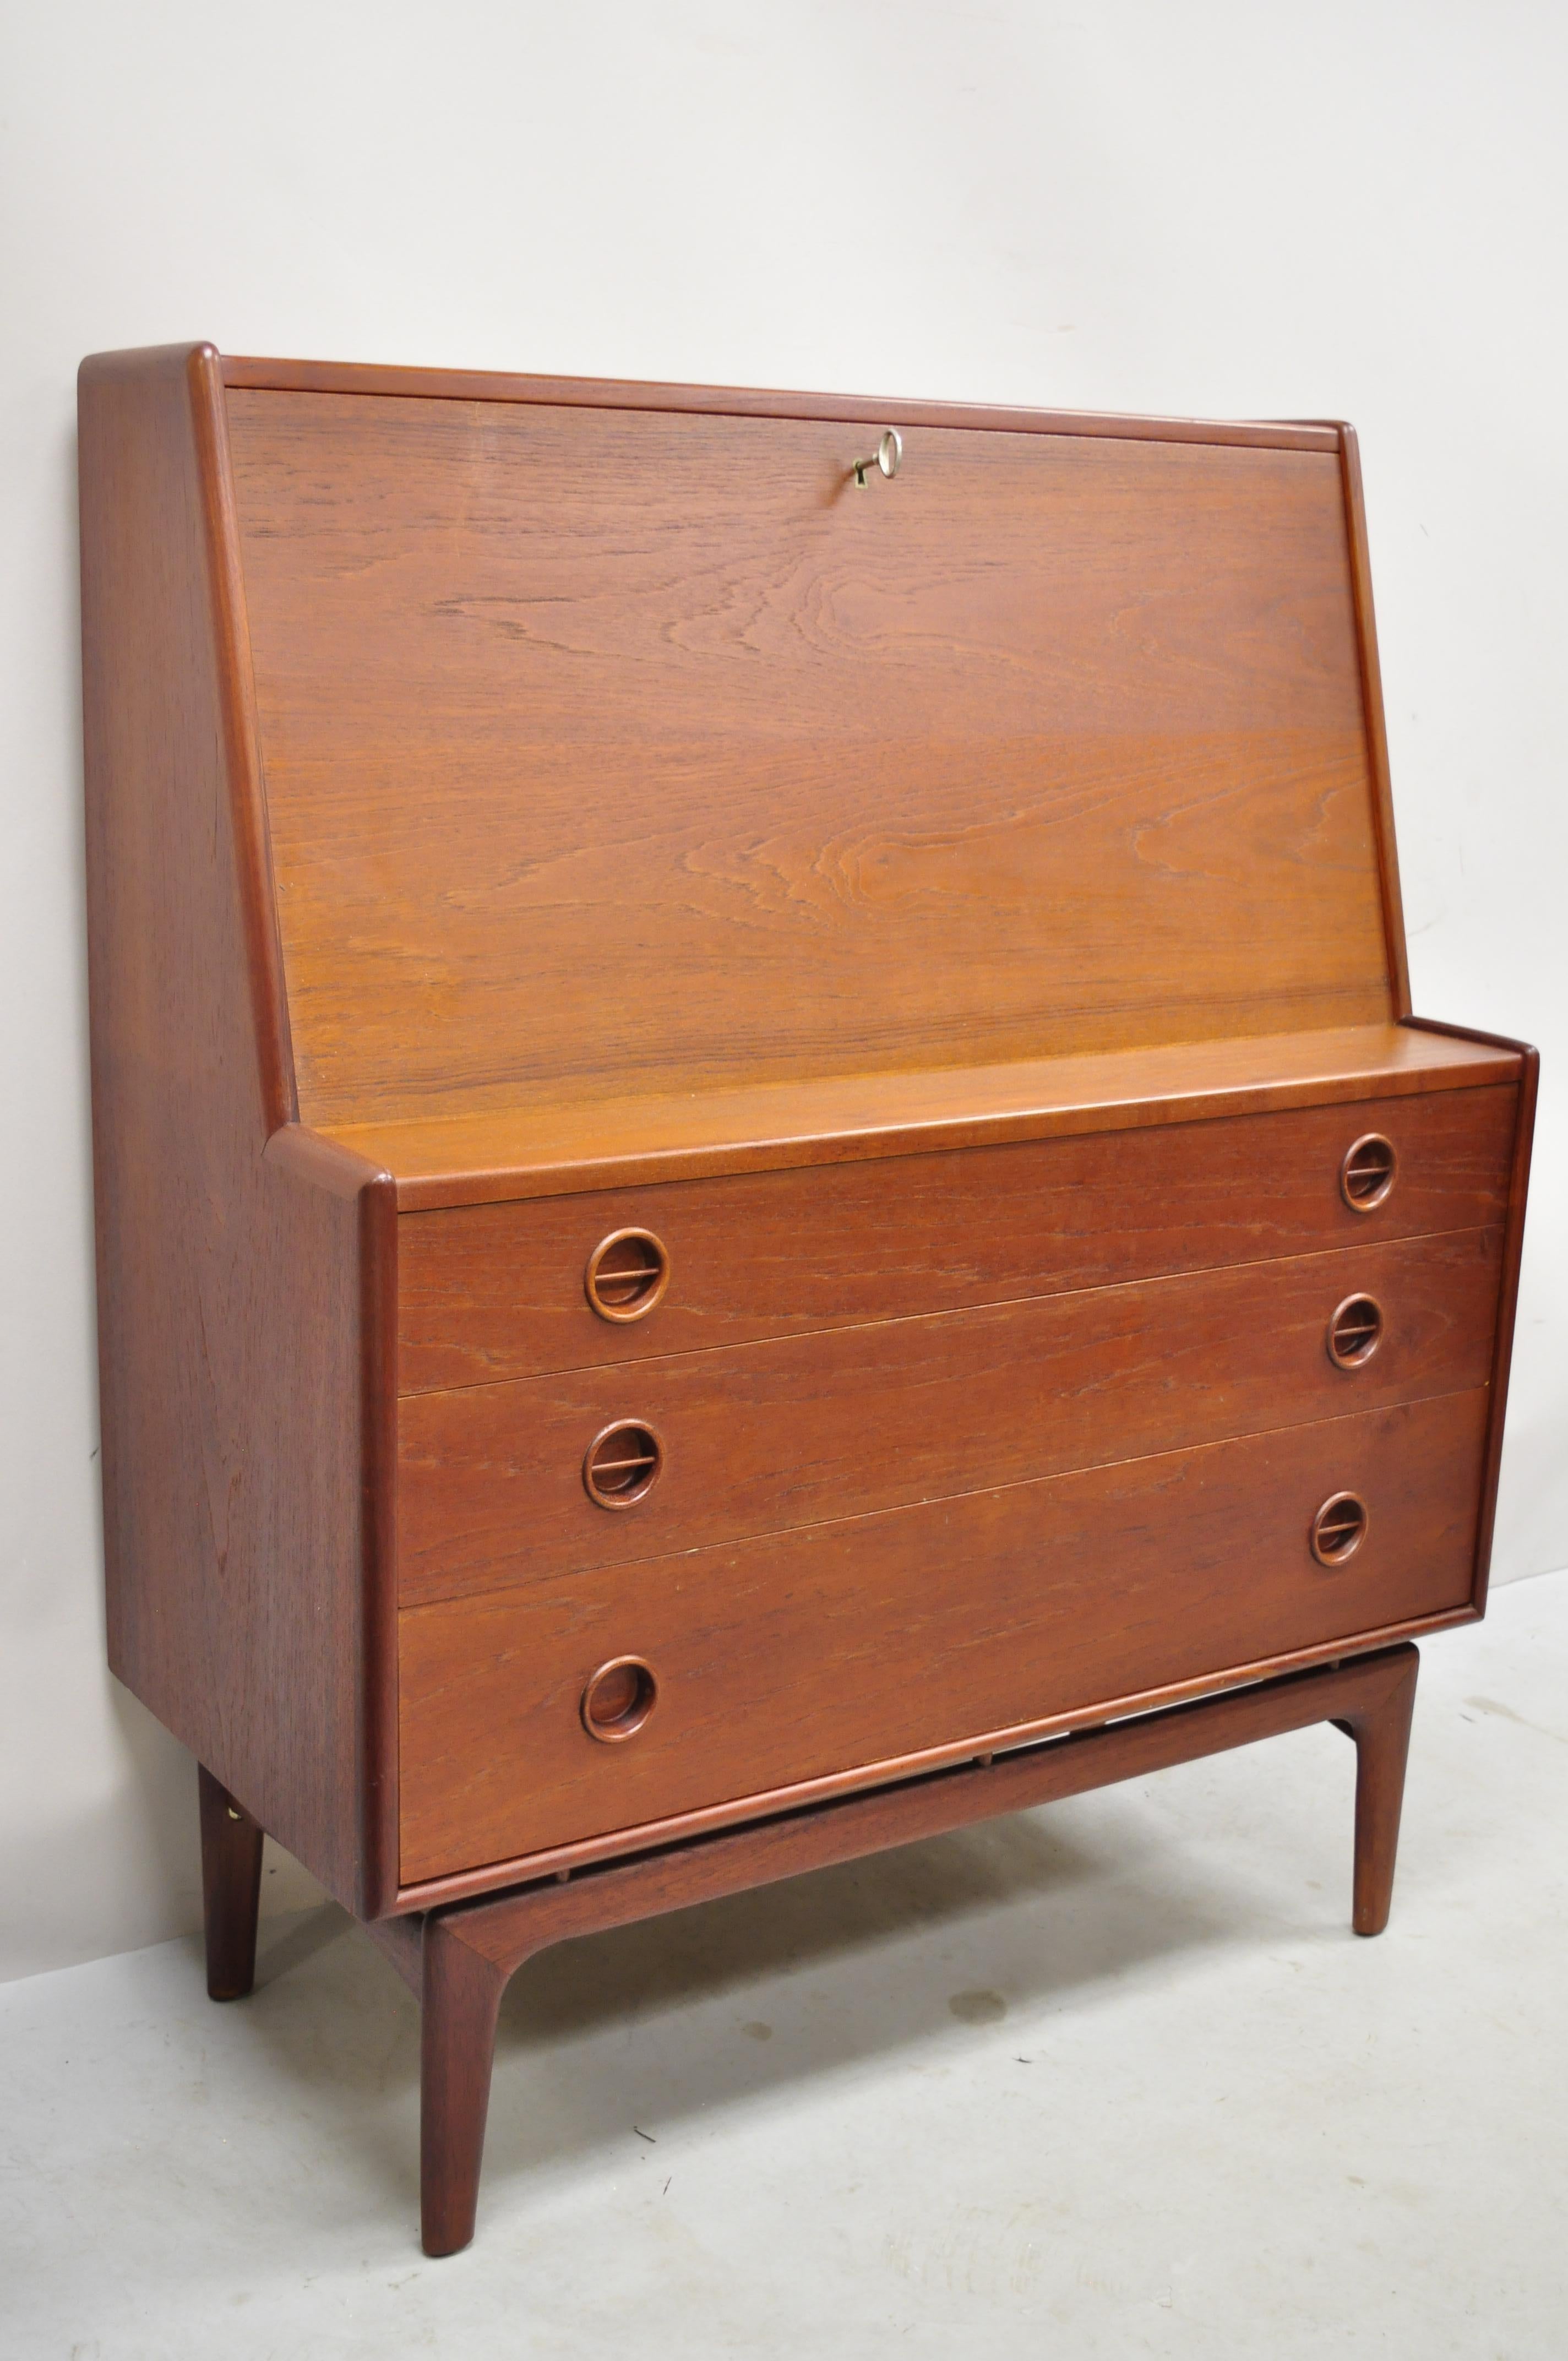 Mid Century Danish Modern Arne Hovmand Olsen MK Teak Drop Front Secretary Desk. Item features sculpted wood floating base, drop front lid with fitted interior, beautiful wood grain, original label, working lock and key, 3 dovetailed drawers, very